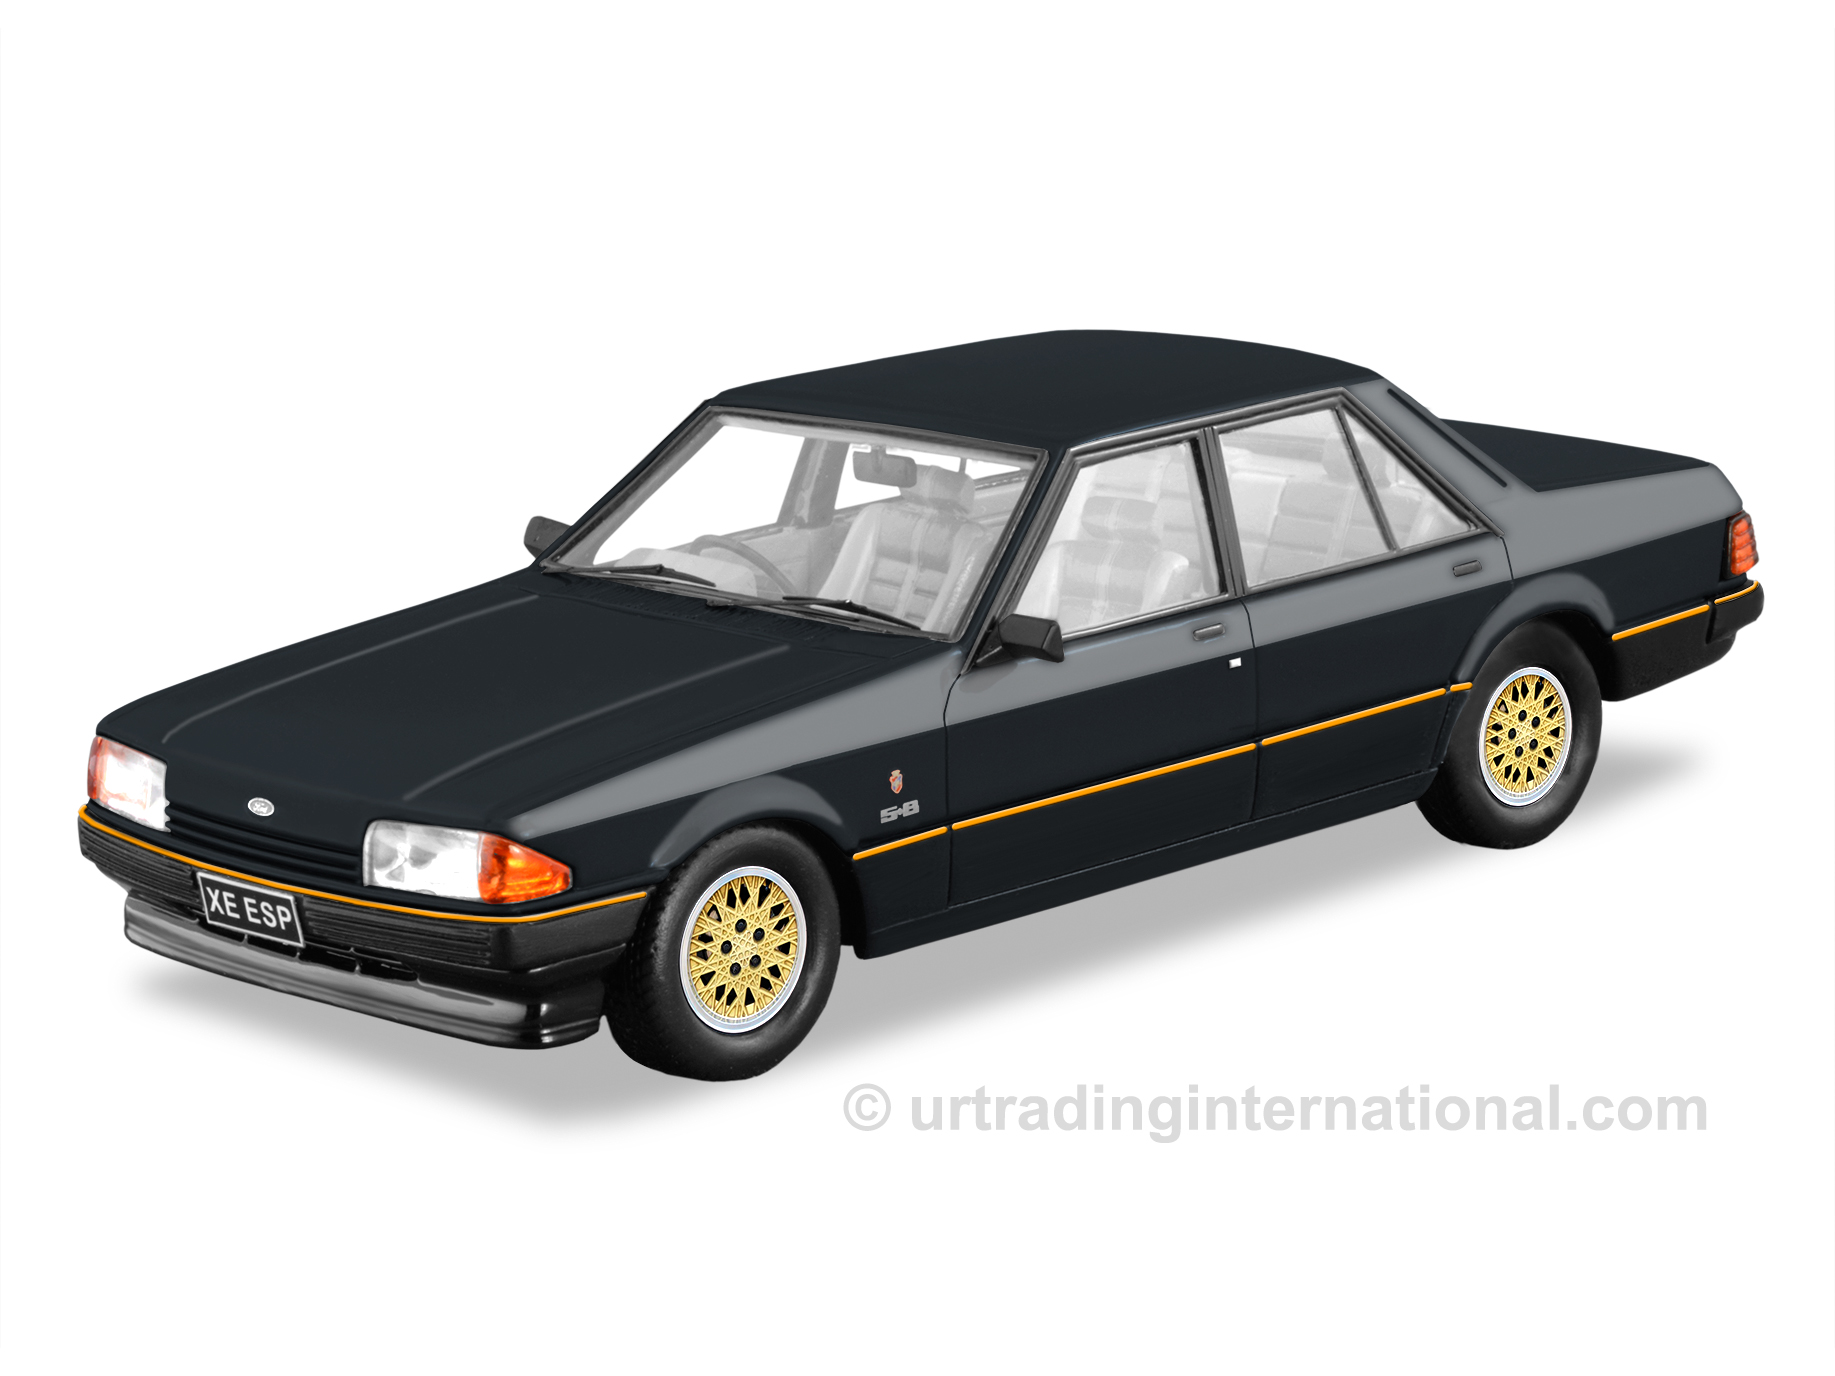 1982 Ford Falcon XE ESP – Charcoal, Limited Edition – 250pcs